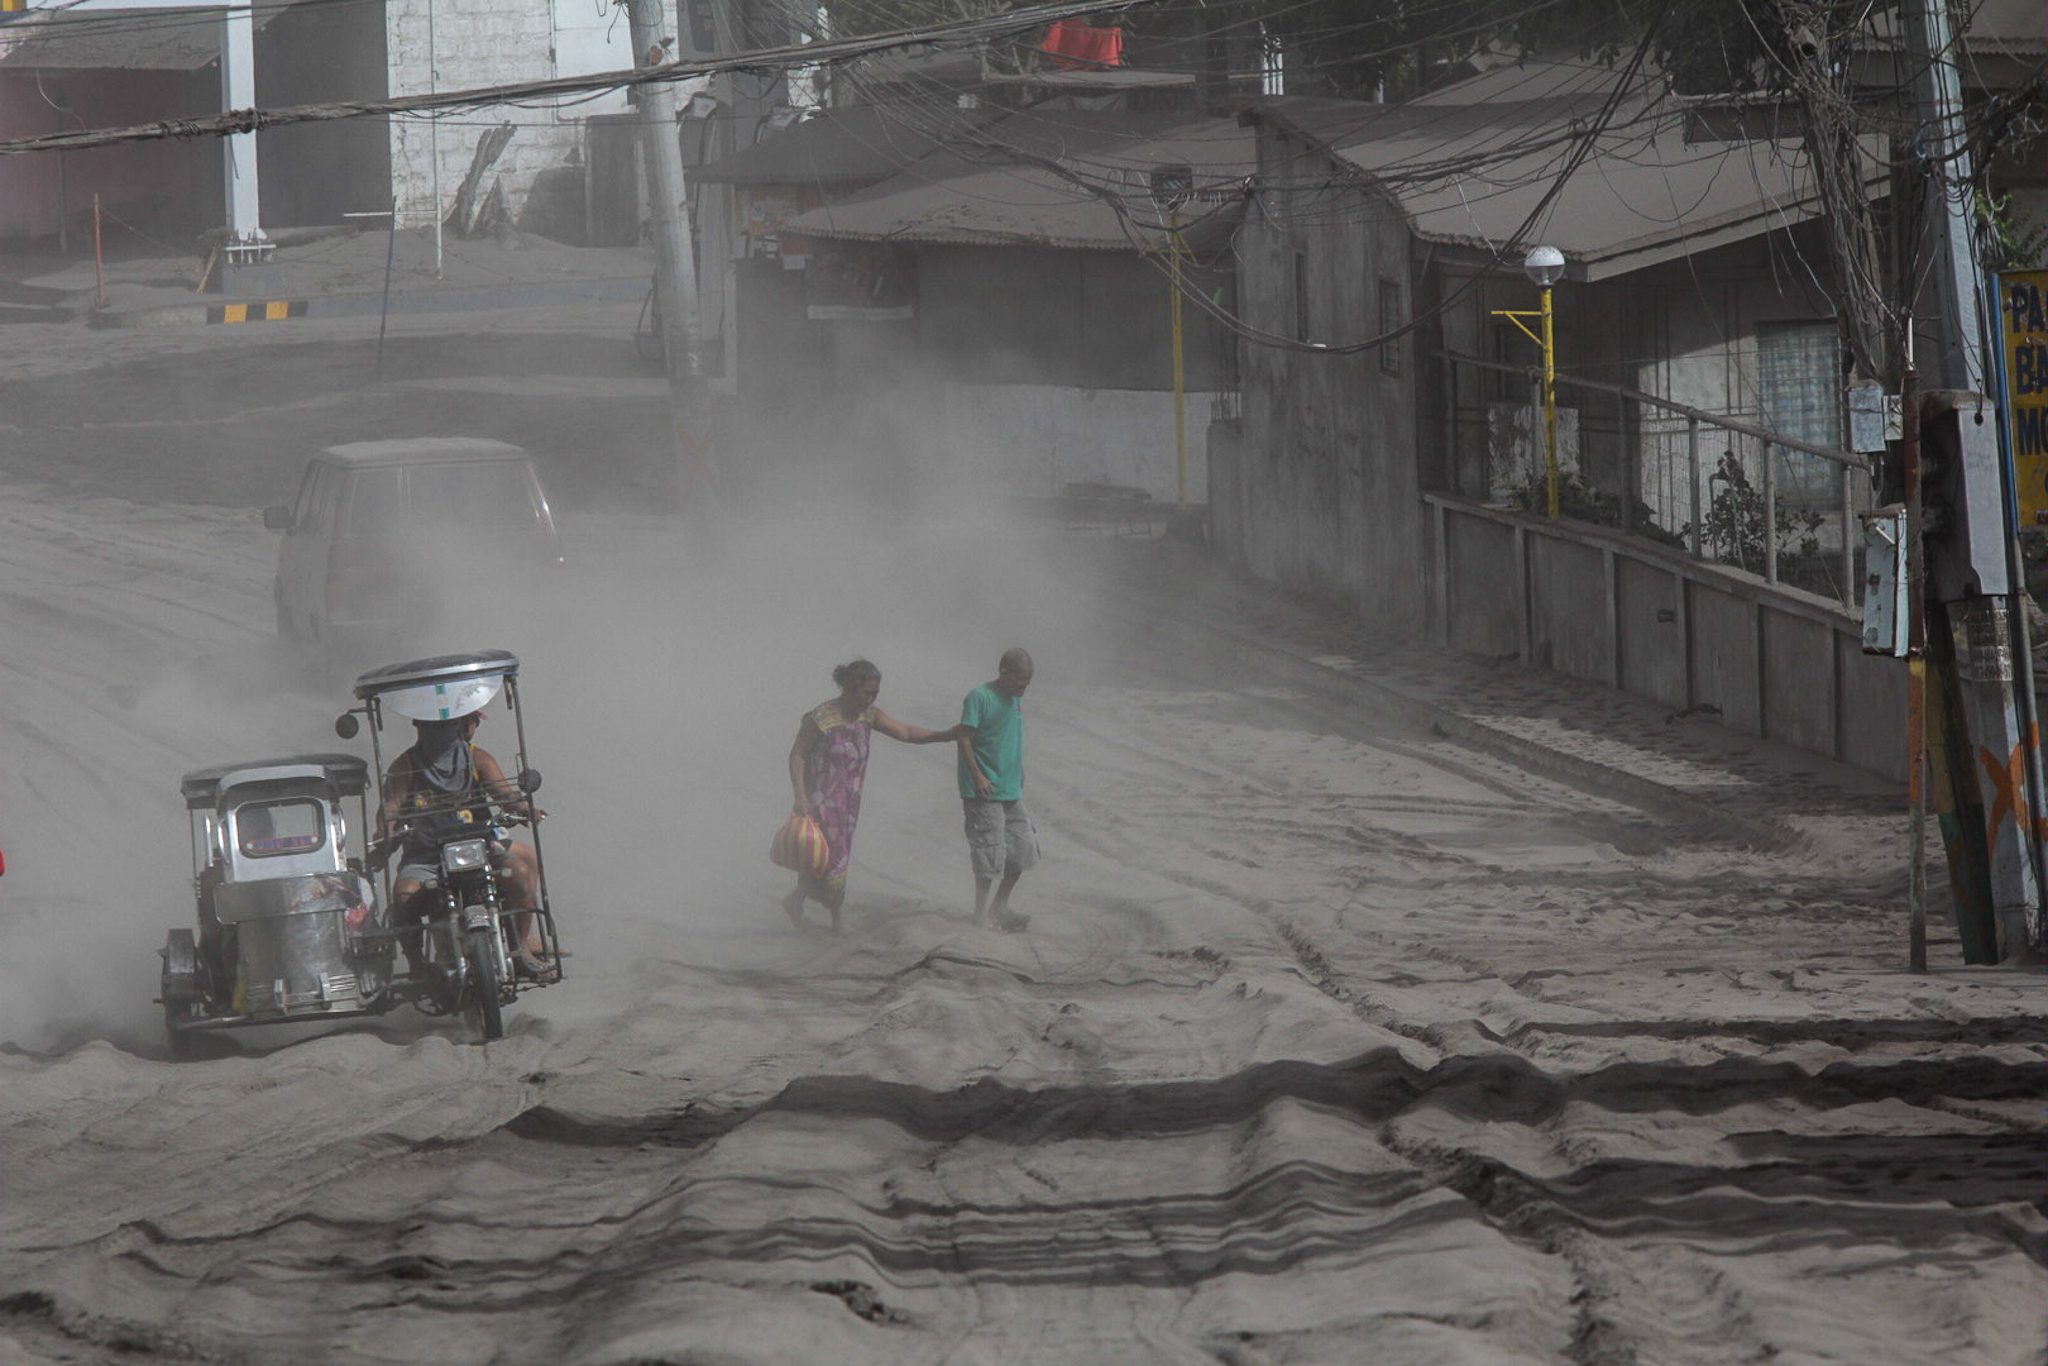 More than 24,000 people flee as Taal Volcano spews ash, lava